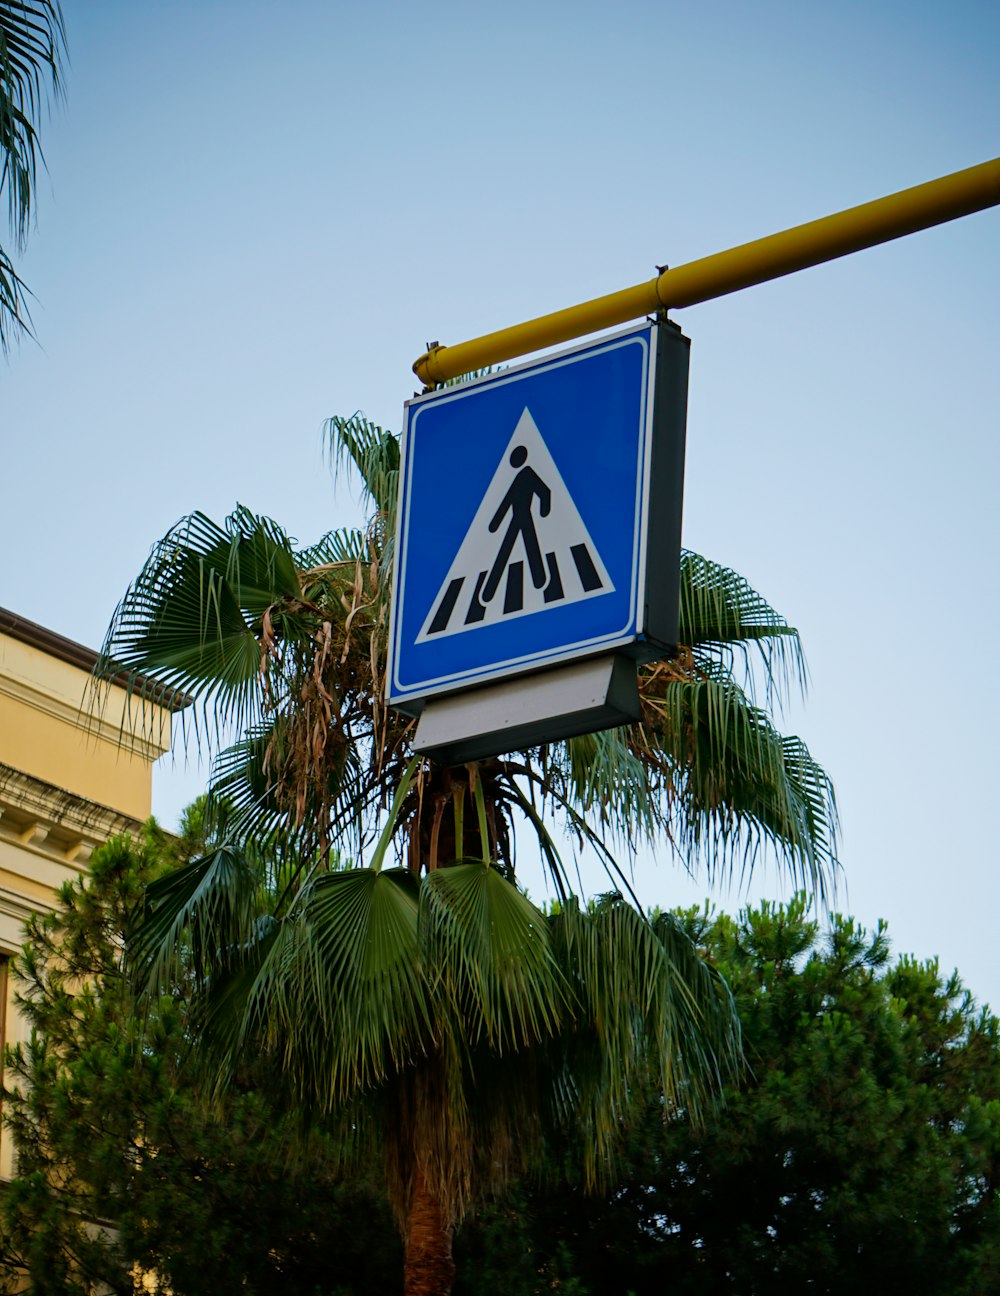 a blue and white street sign hanging from a yellow pole